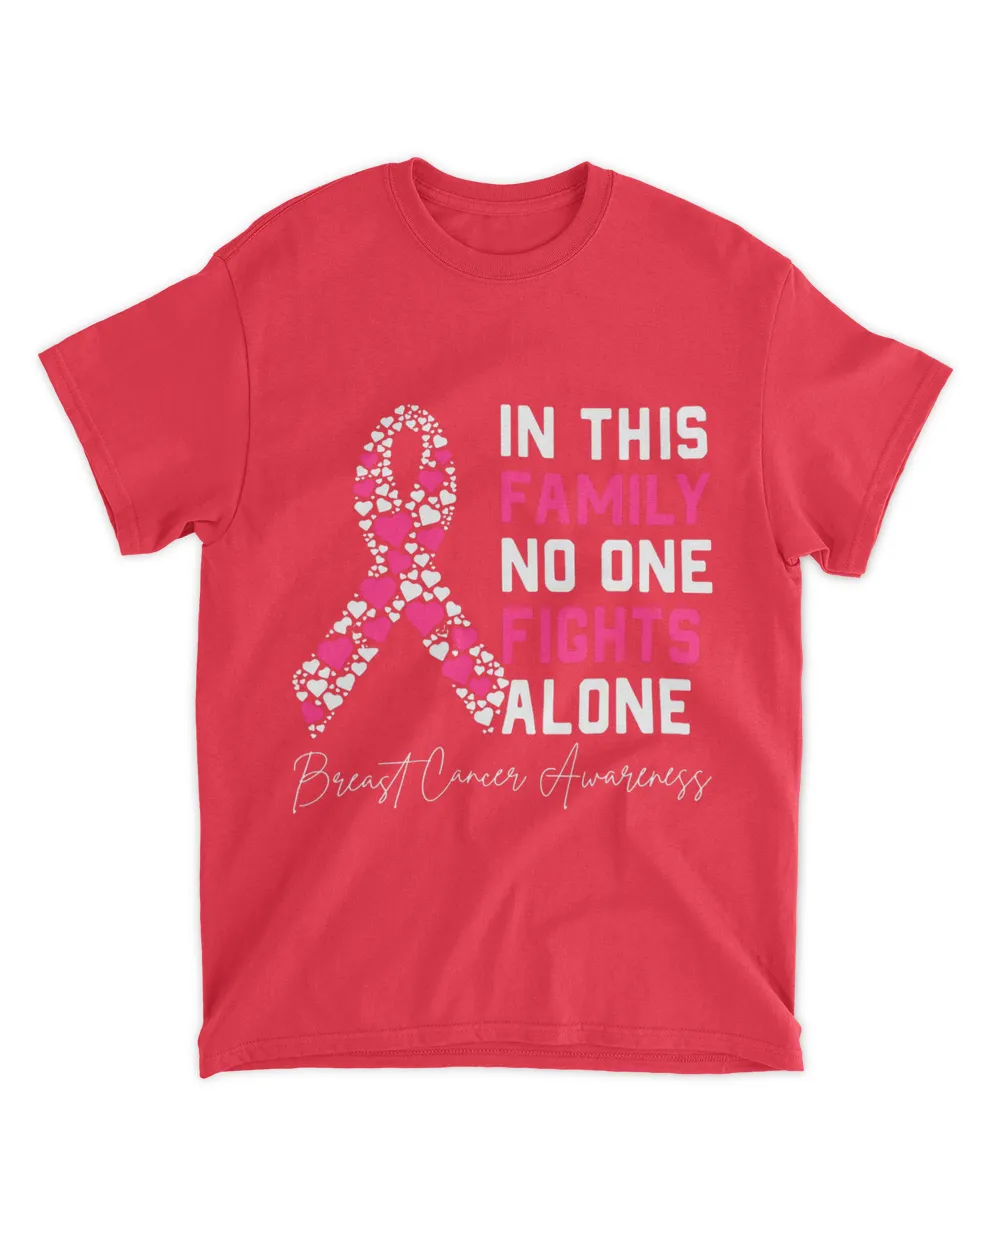 In This Family No One Fight Alone Breast Cancer Awareness 8